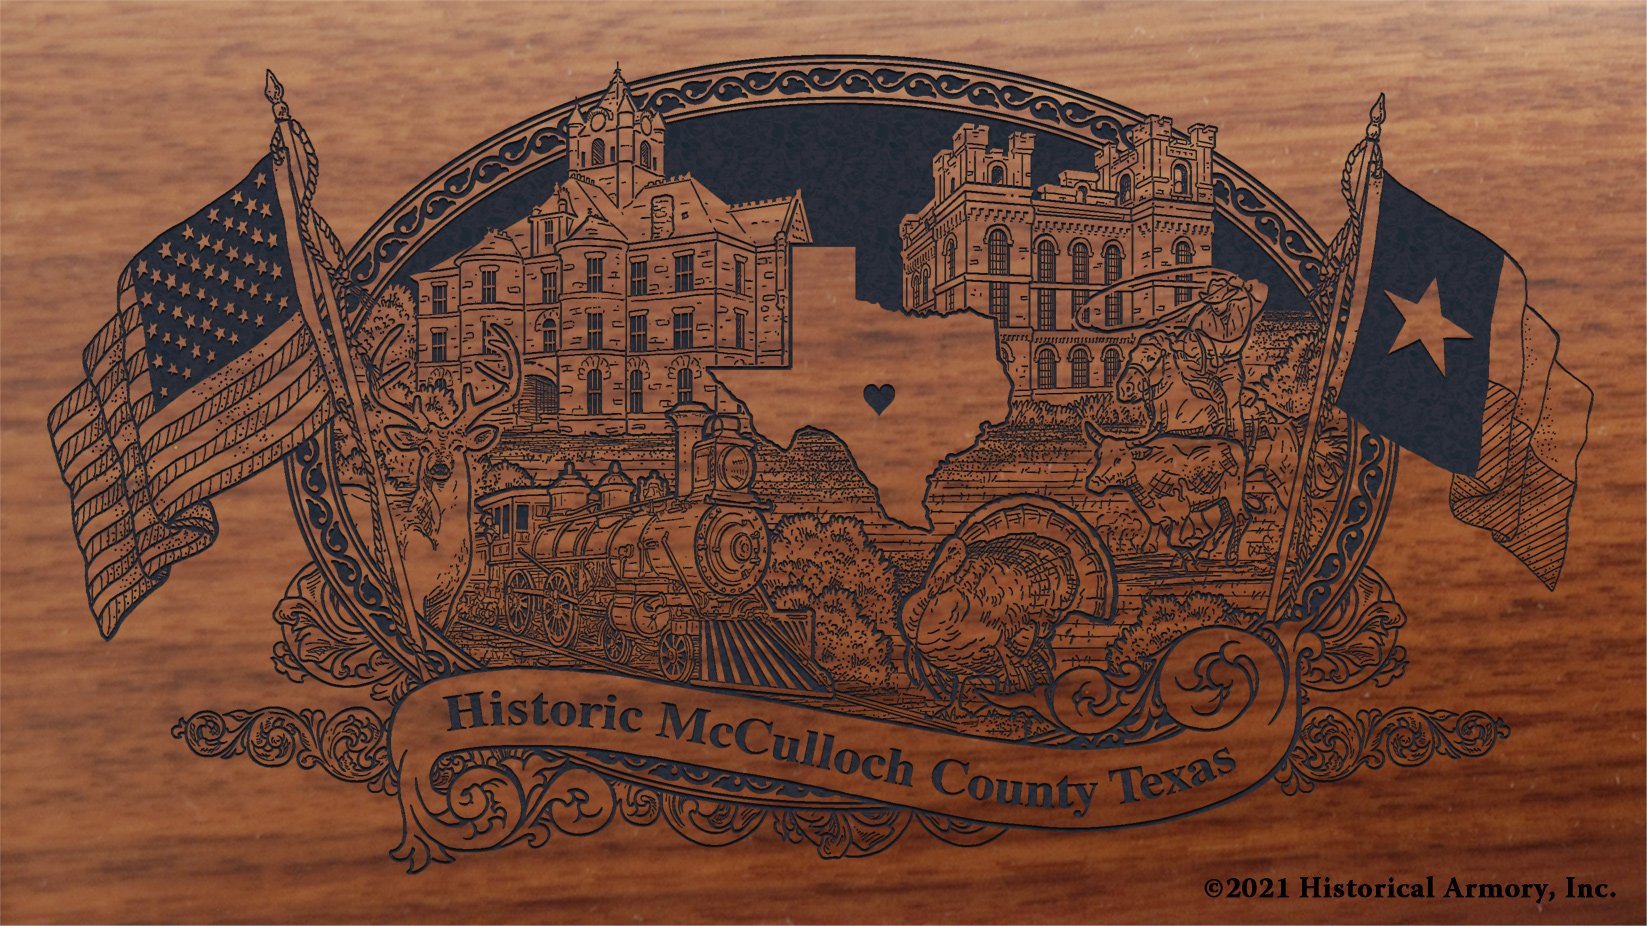 Engraved artwork | History of McCulloch County Texas | Historical Armory